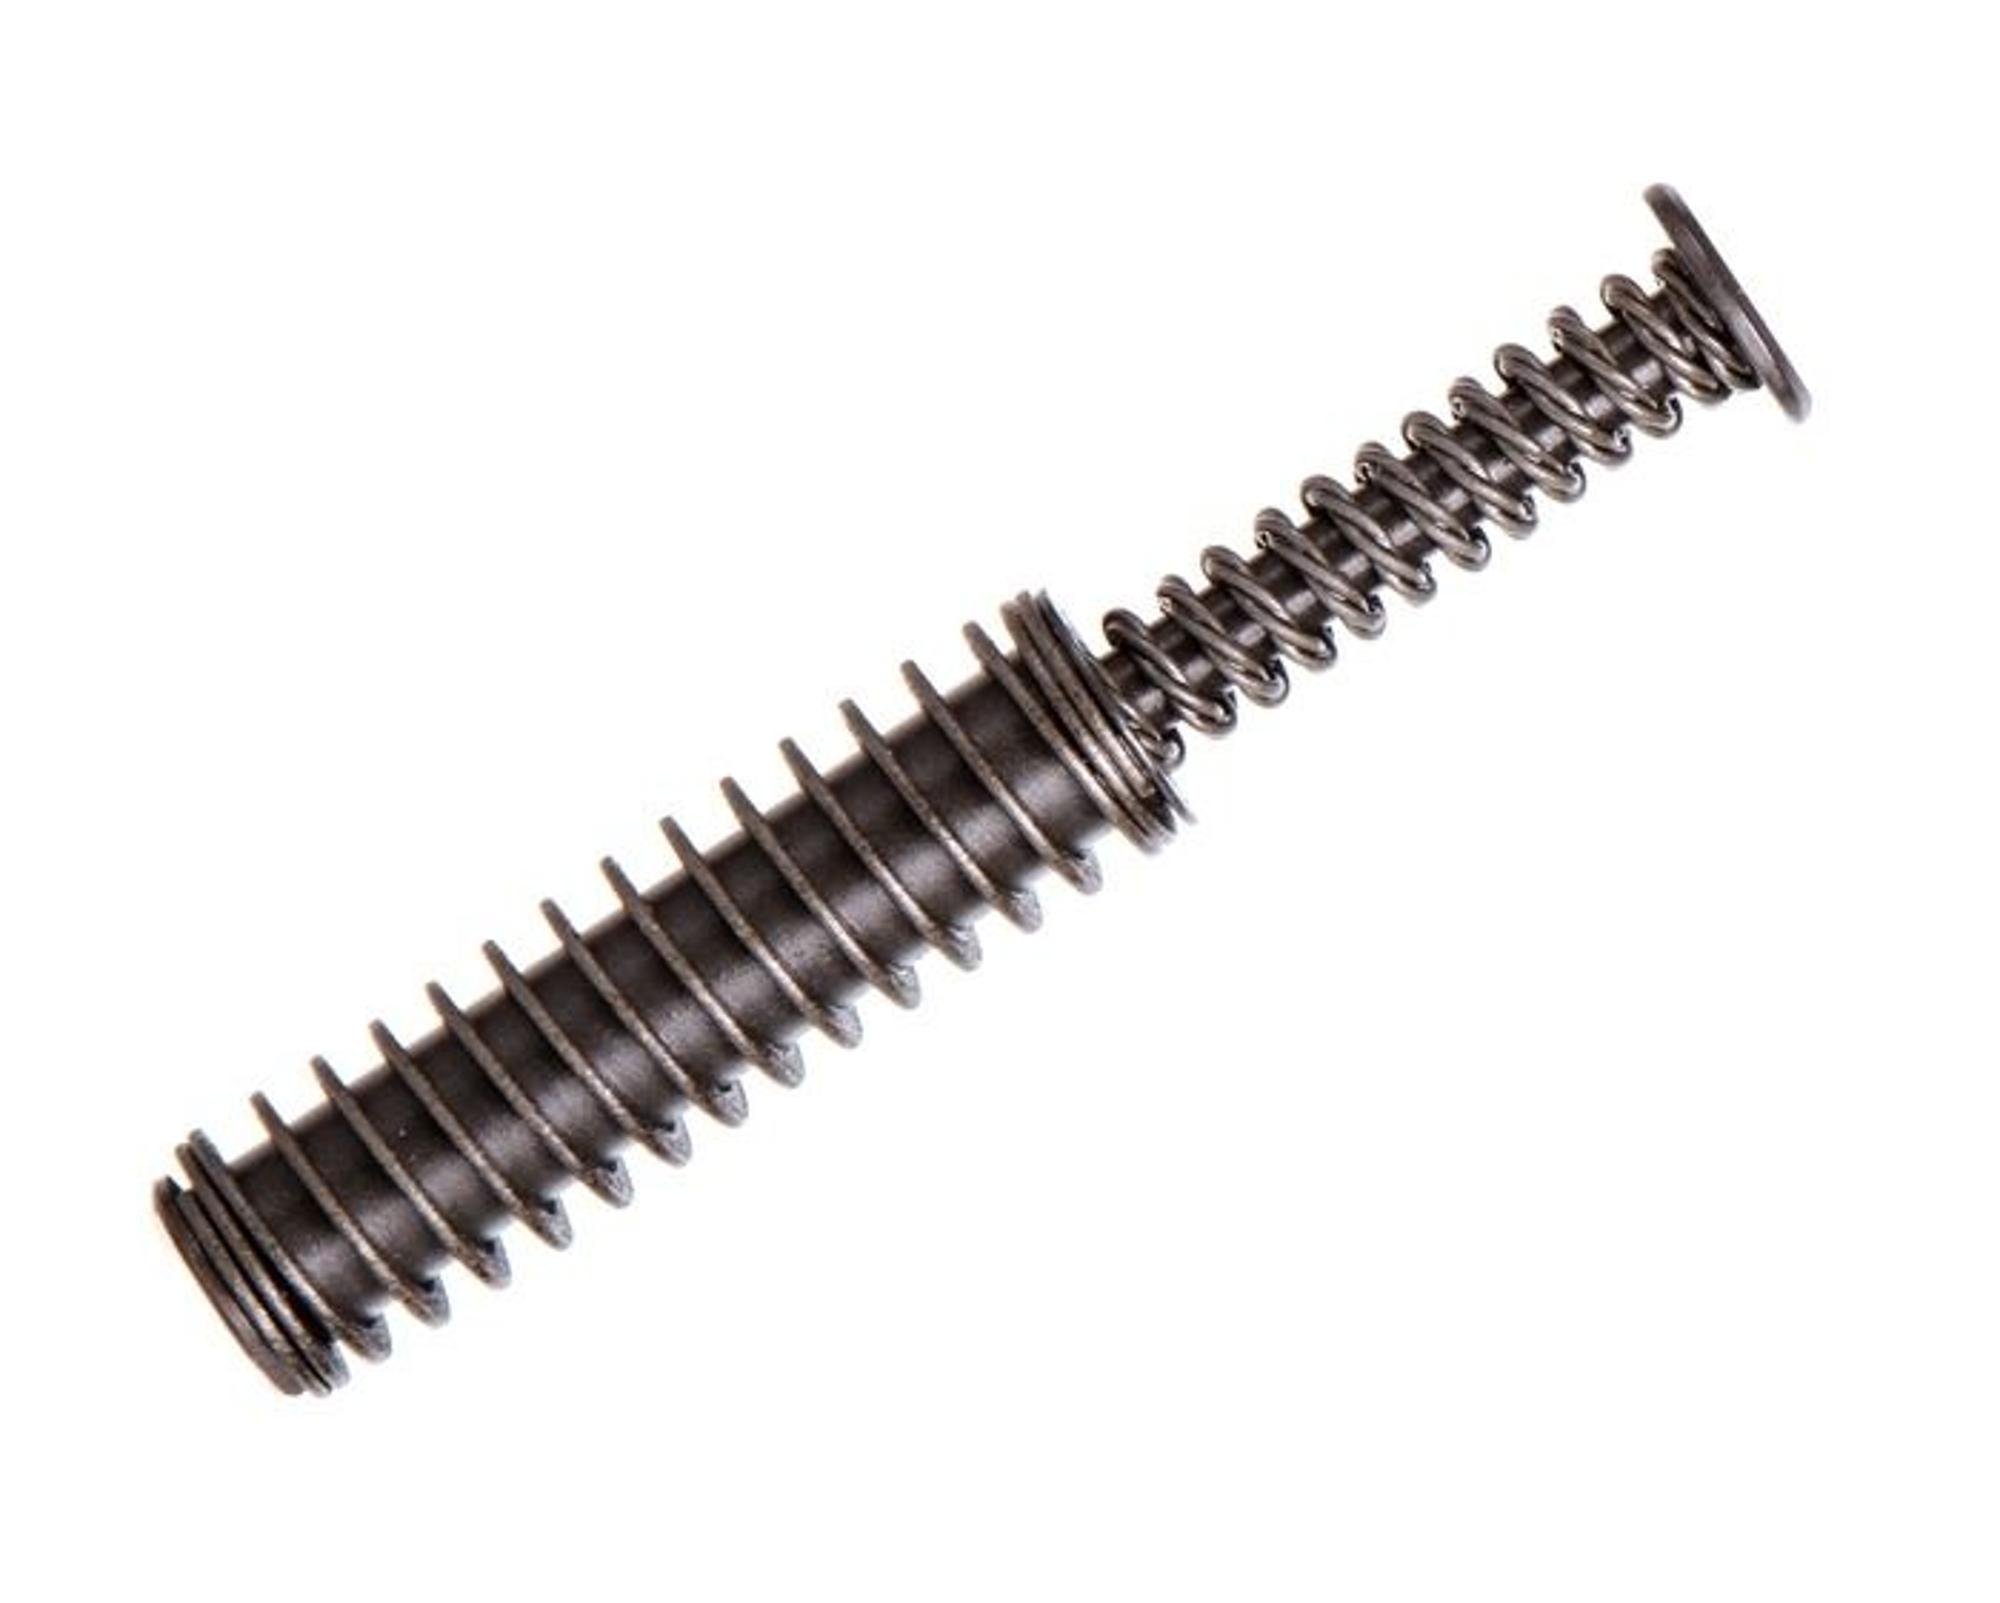  Recoil Spring Assy.320c